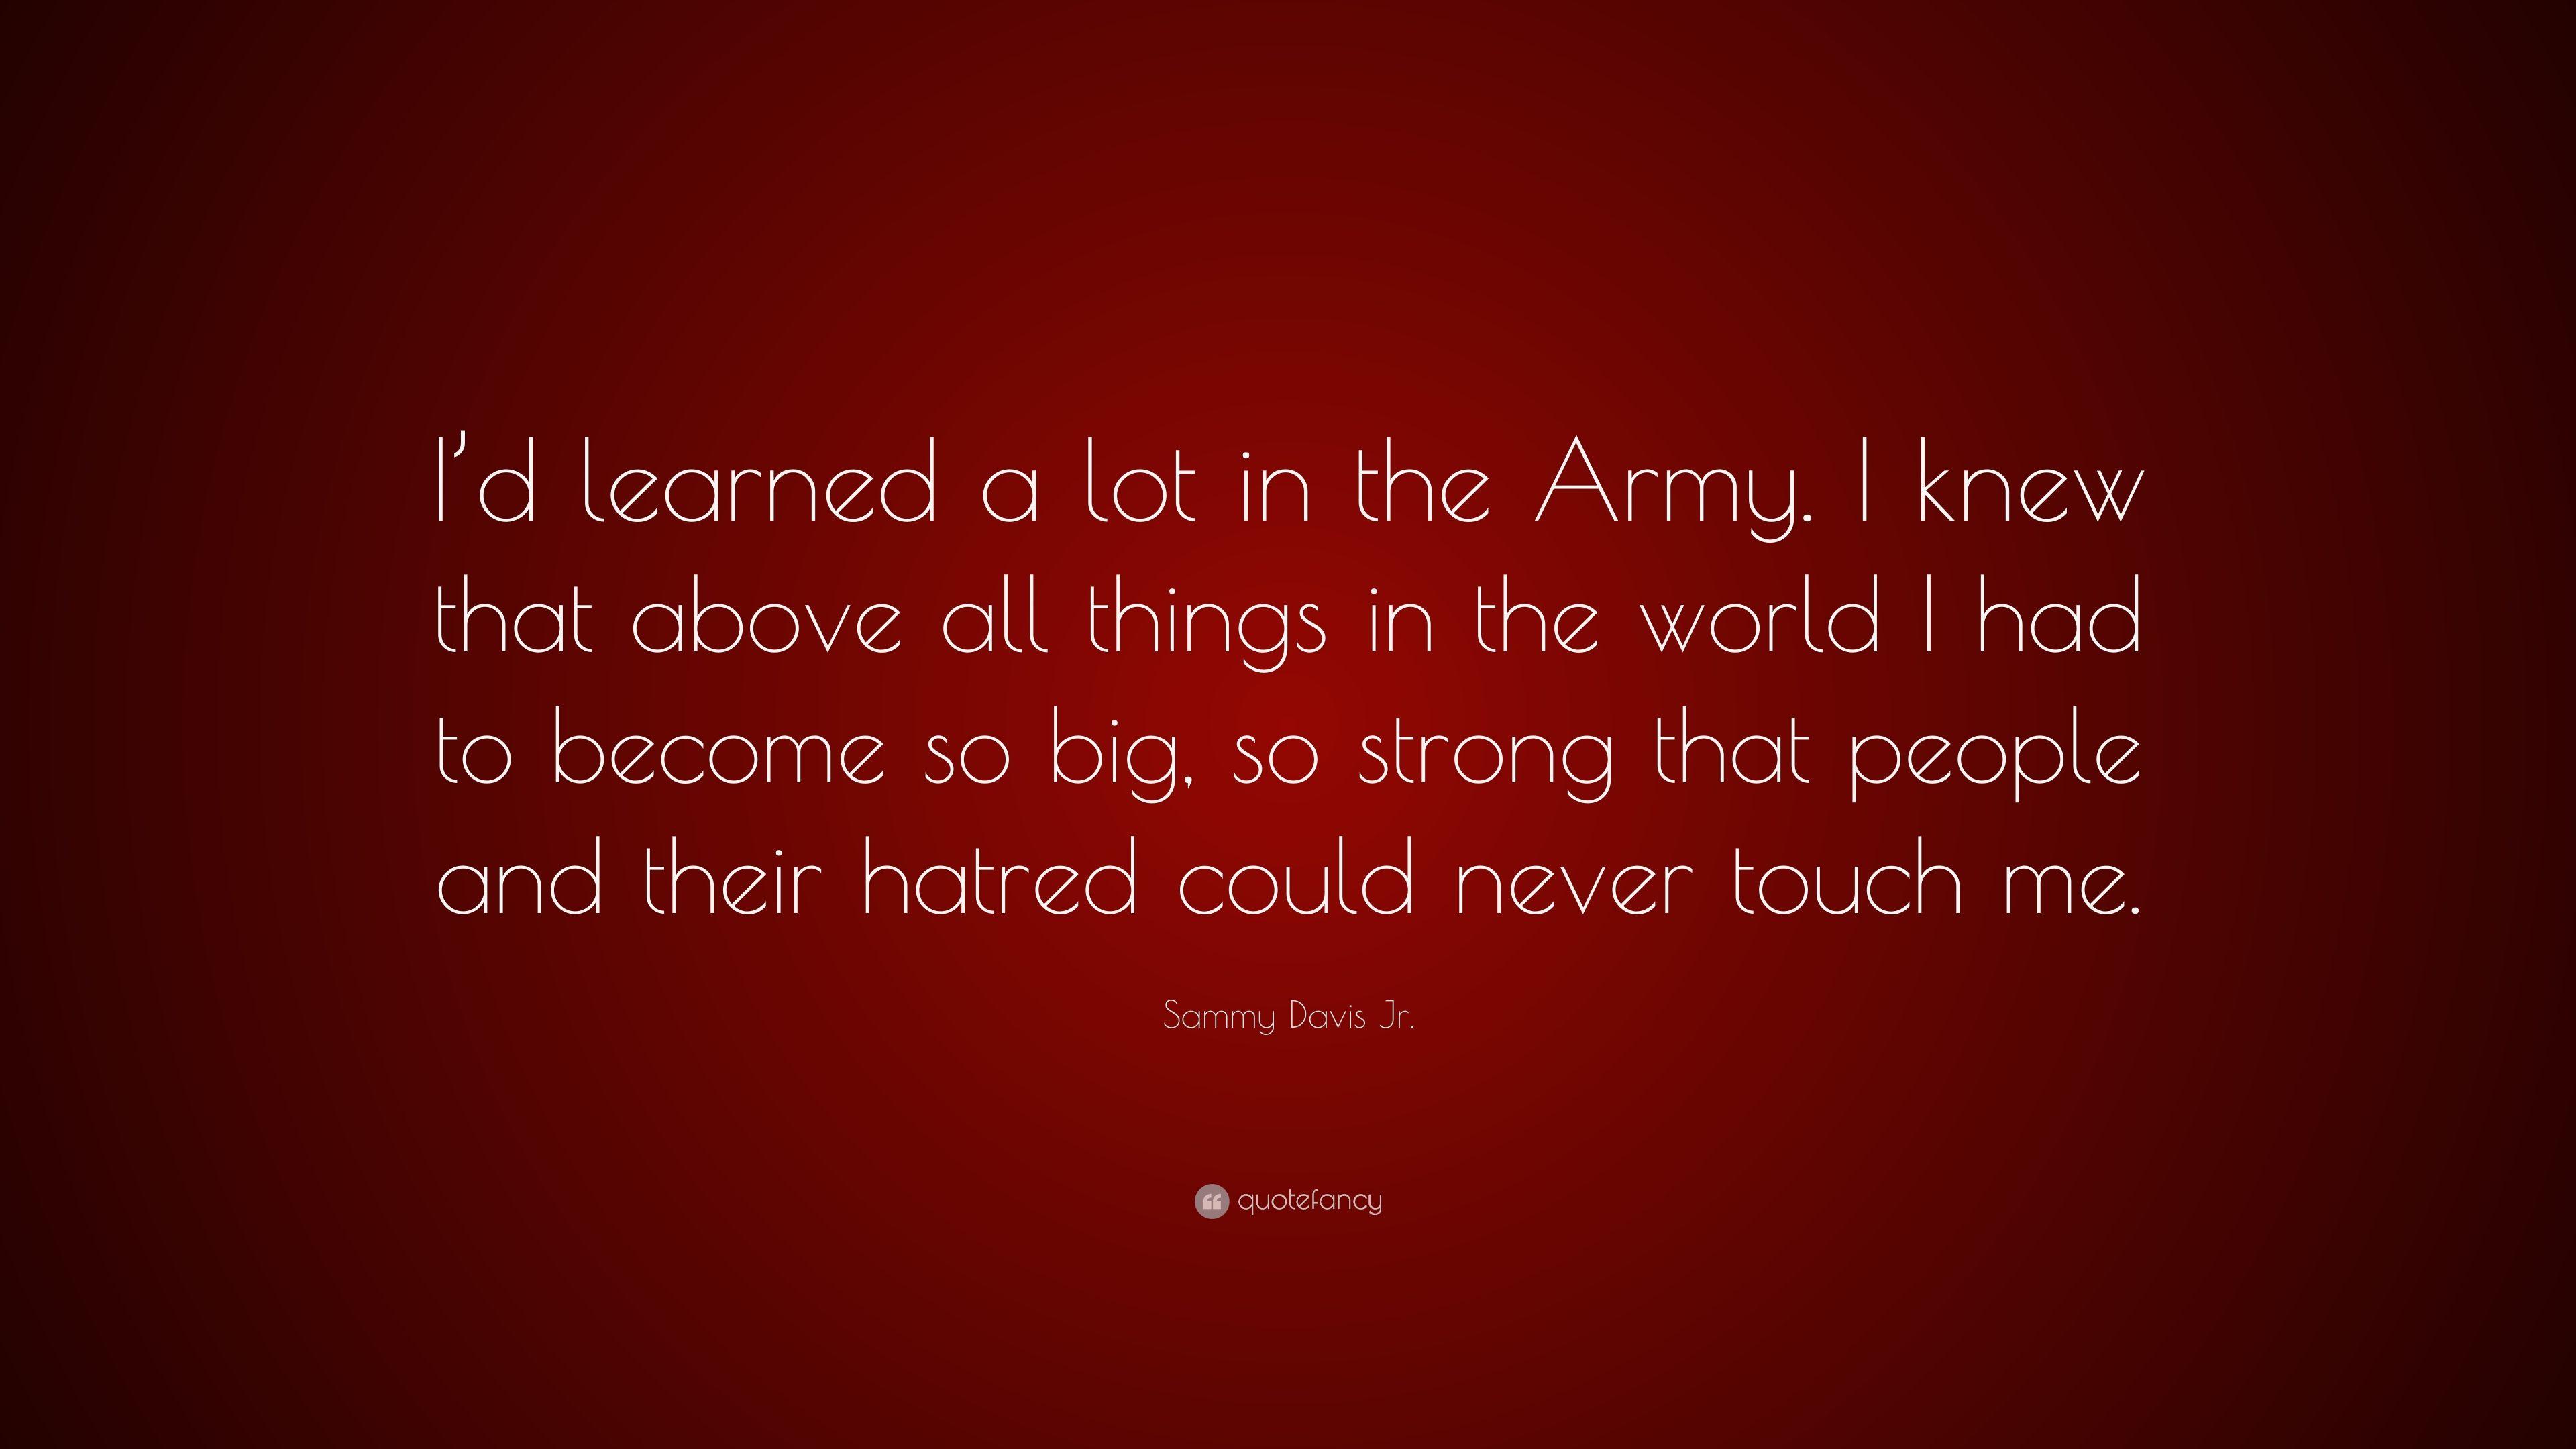 Sammy Davis Jr. Quote: “I'd learned a lot in the Army. I knew that